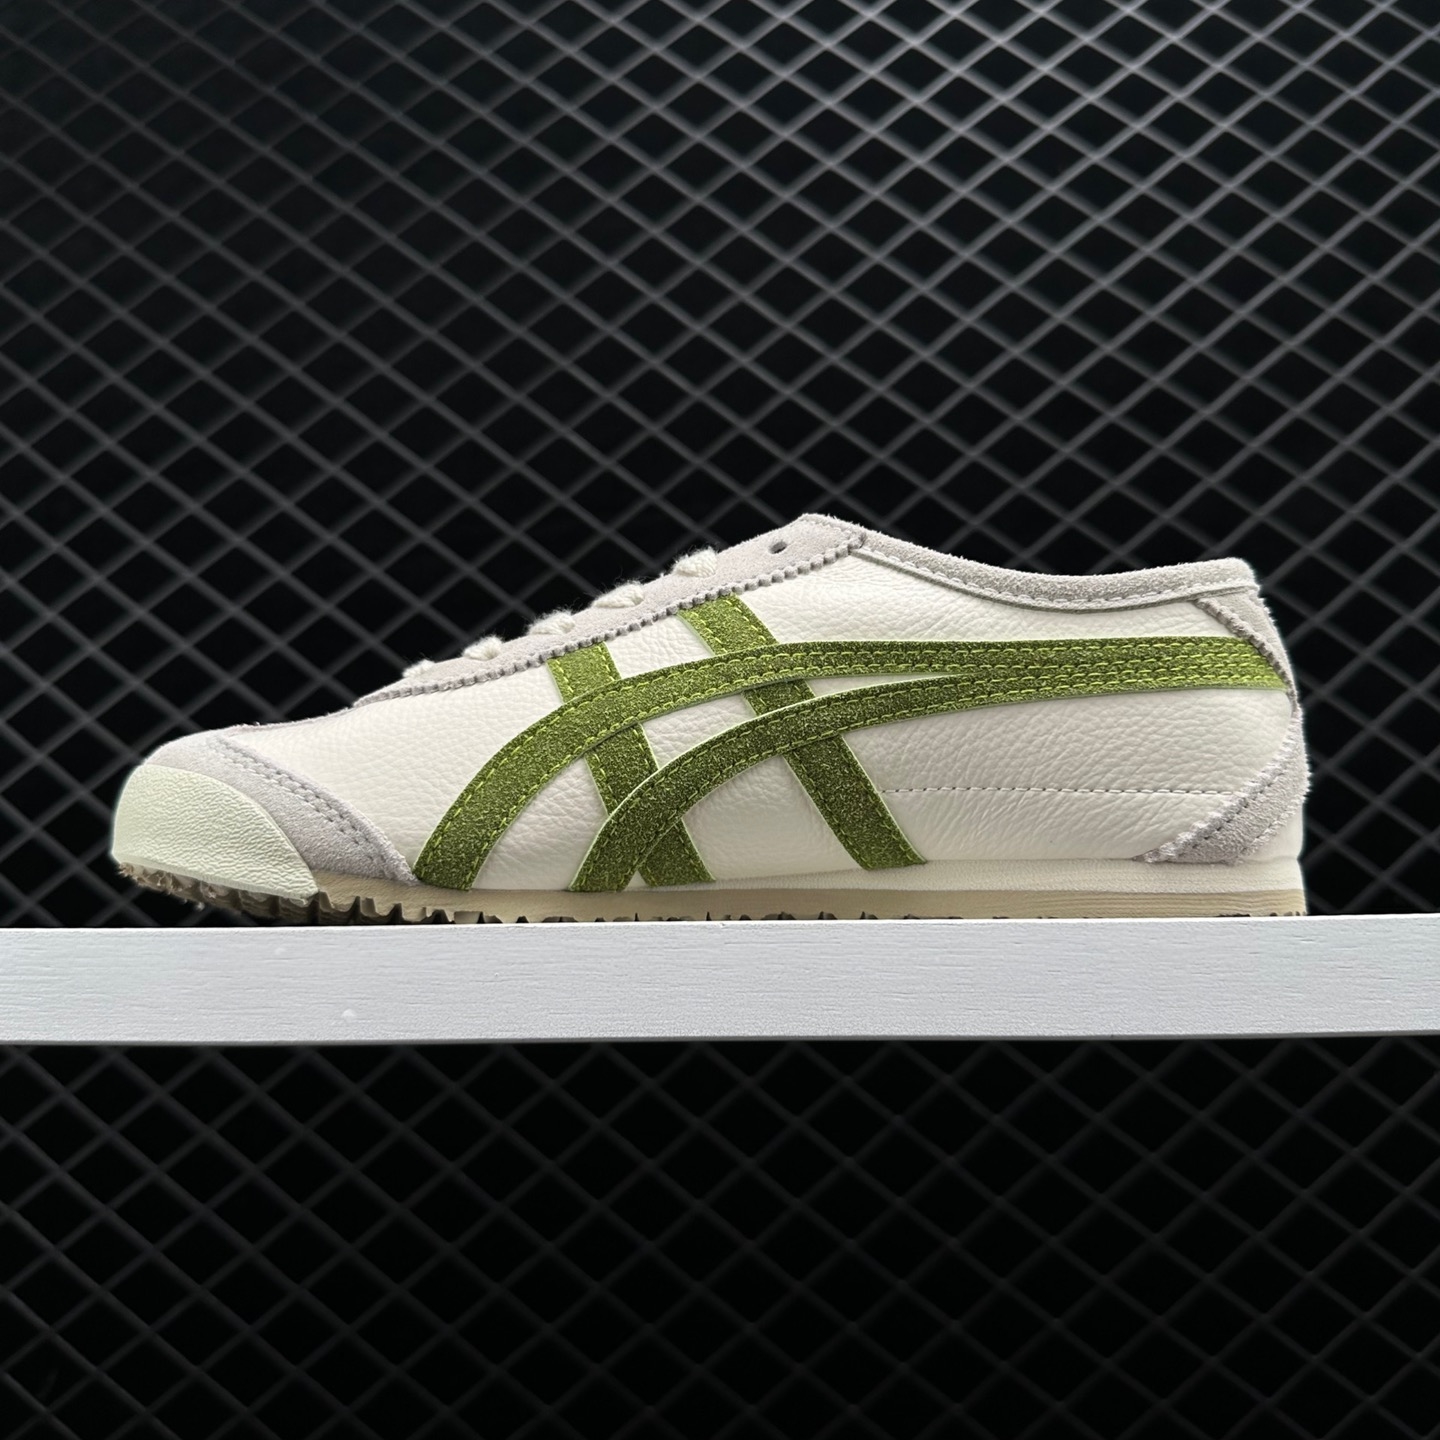 Onitsuka Mexico 66 Vin Birch Green - Stylish and Classic Sneakers